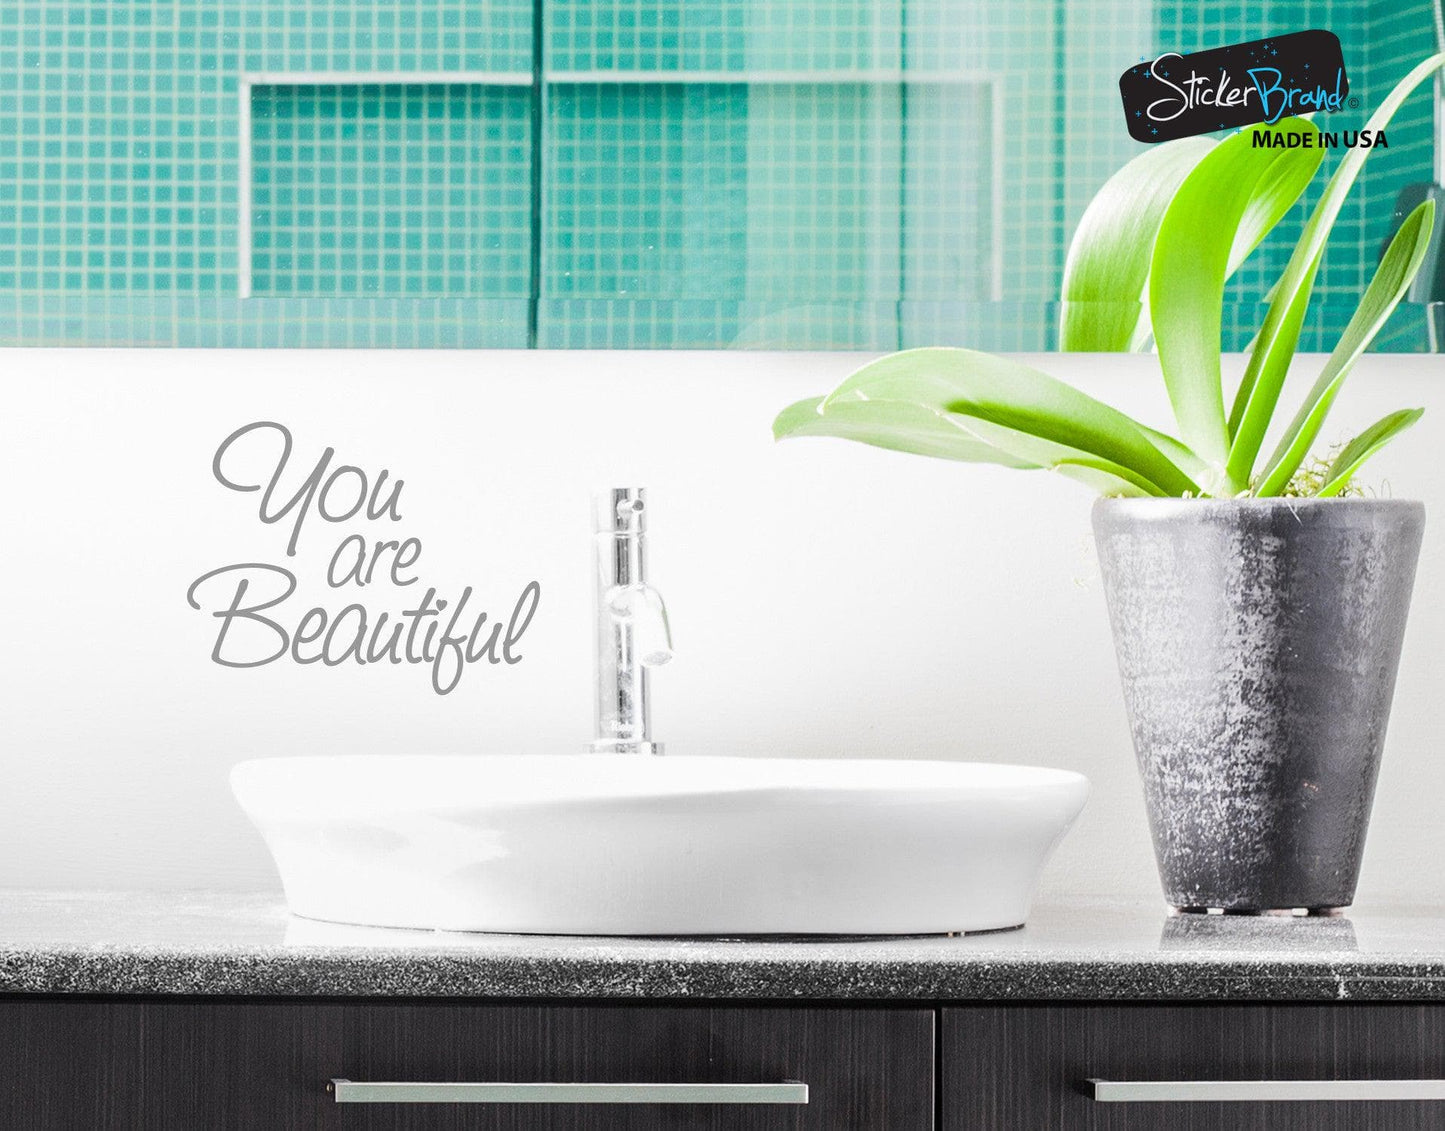 You are Beautiful Vinyl Decal Sticker for Mirrors or walls. Boost